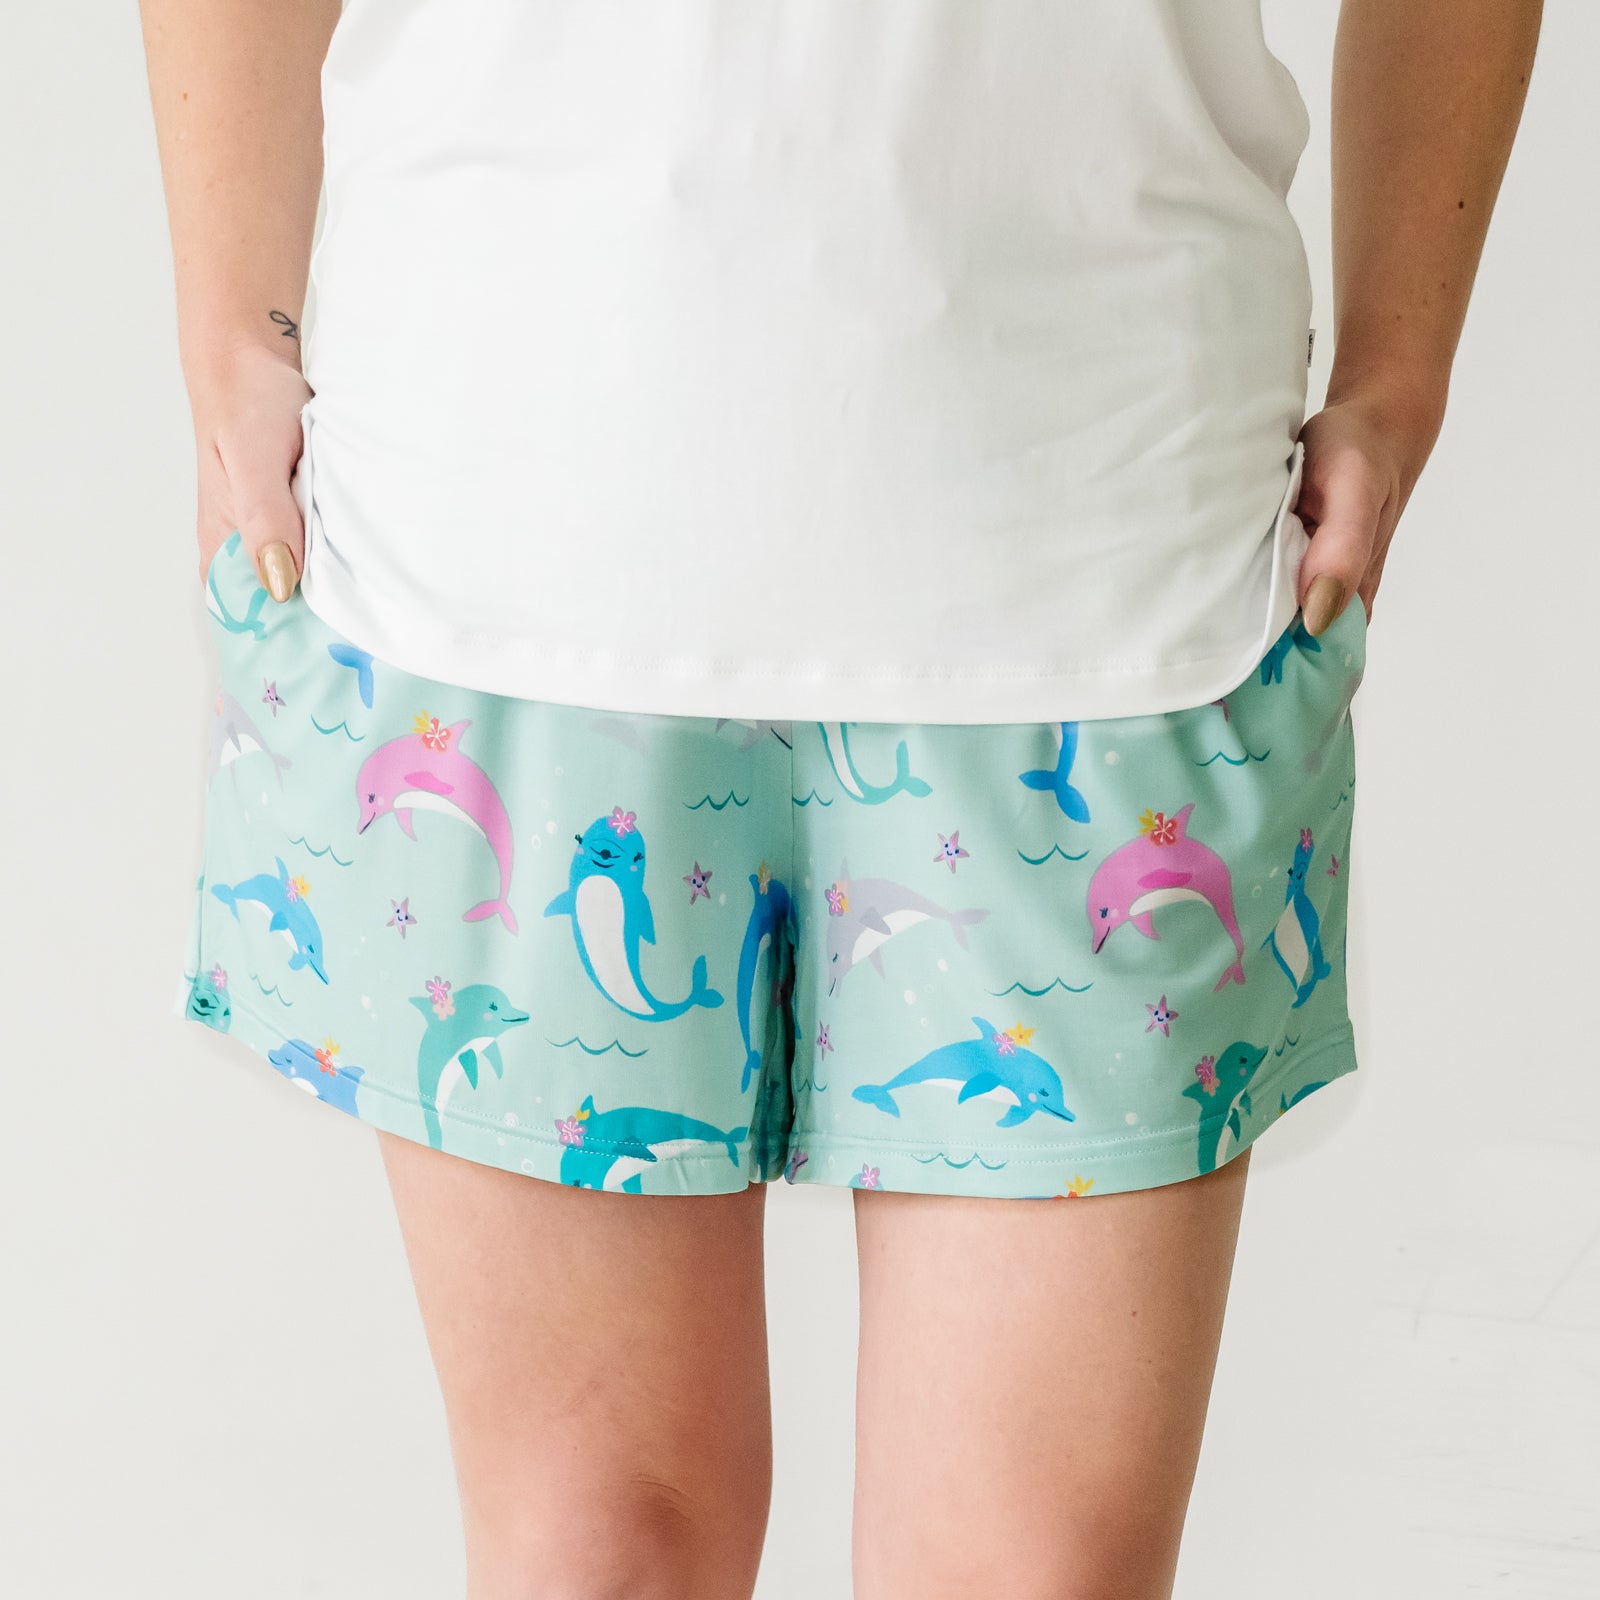 Close up image of a woman wearing Dolphin Dance women's pajama shorts and coordinating top